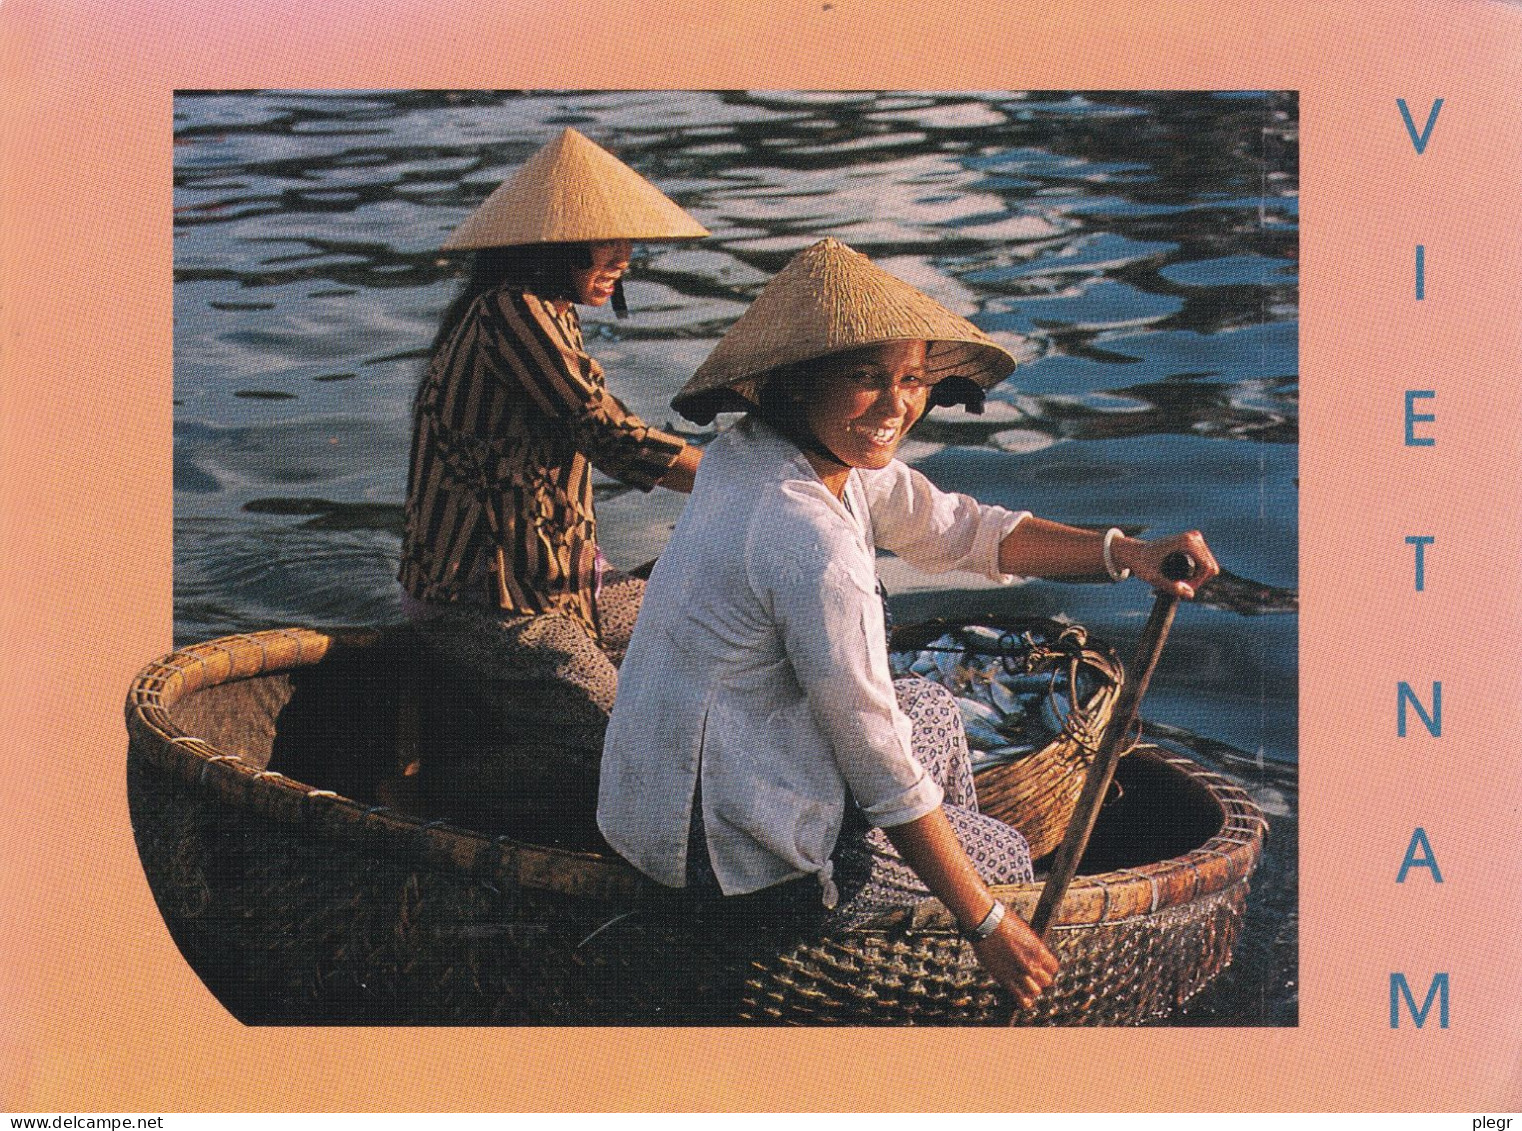 VNM 02 03#1 - VIET NAM - A BIG BASKET, WOVEN TIGHLY AND SEALED WITH TAR IS ALL YOU NEED TO BRING THE DAILY CATCH OF FISH - Vietnam